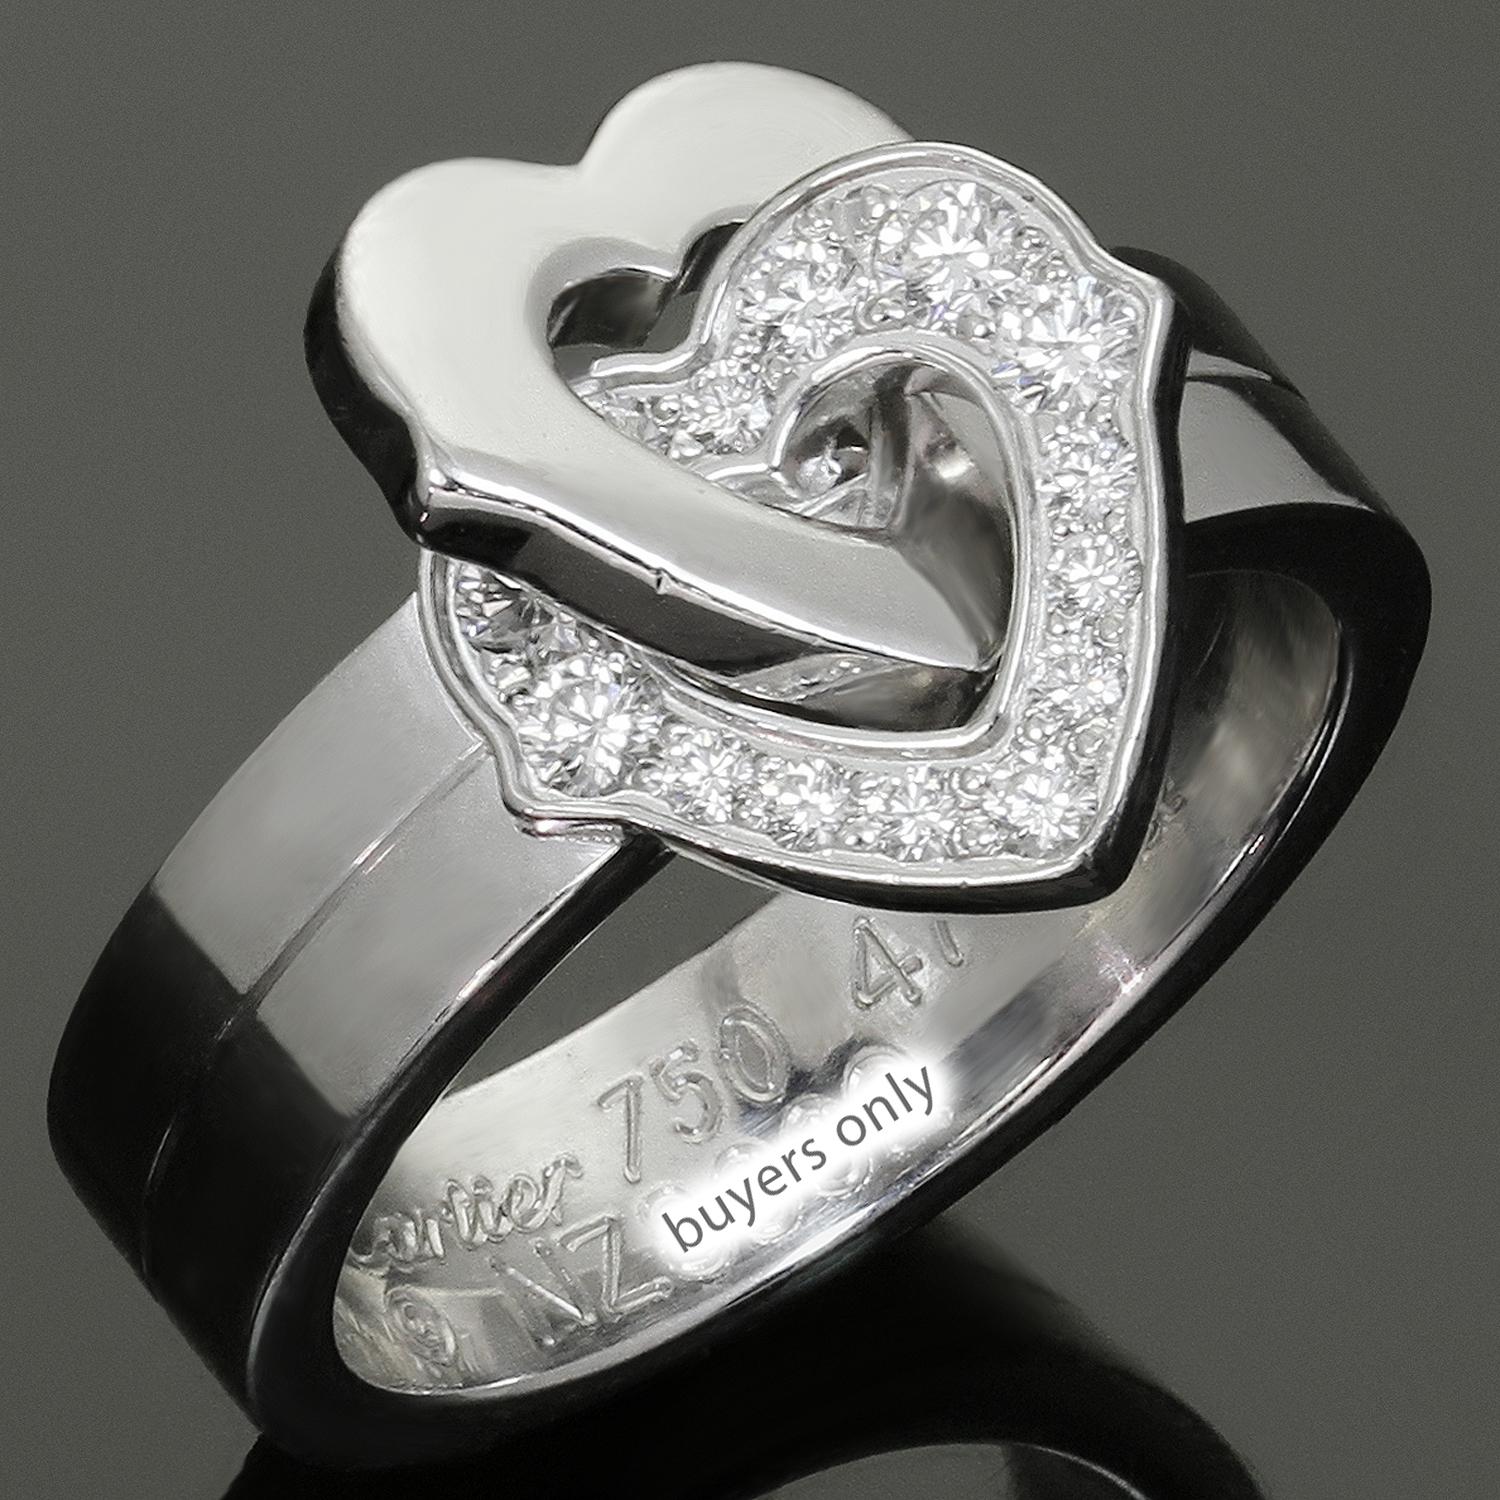 This fabulous Cartier ring features a romantic double heart design crafted in 18k white gold and set with brilliant-cut round D-F VVS1-VVS2 diamonds weighing an estimated 0.16 carats. Made in France circa 2000s. Measurements: 0.47